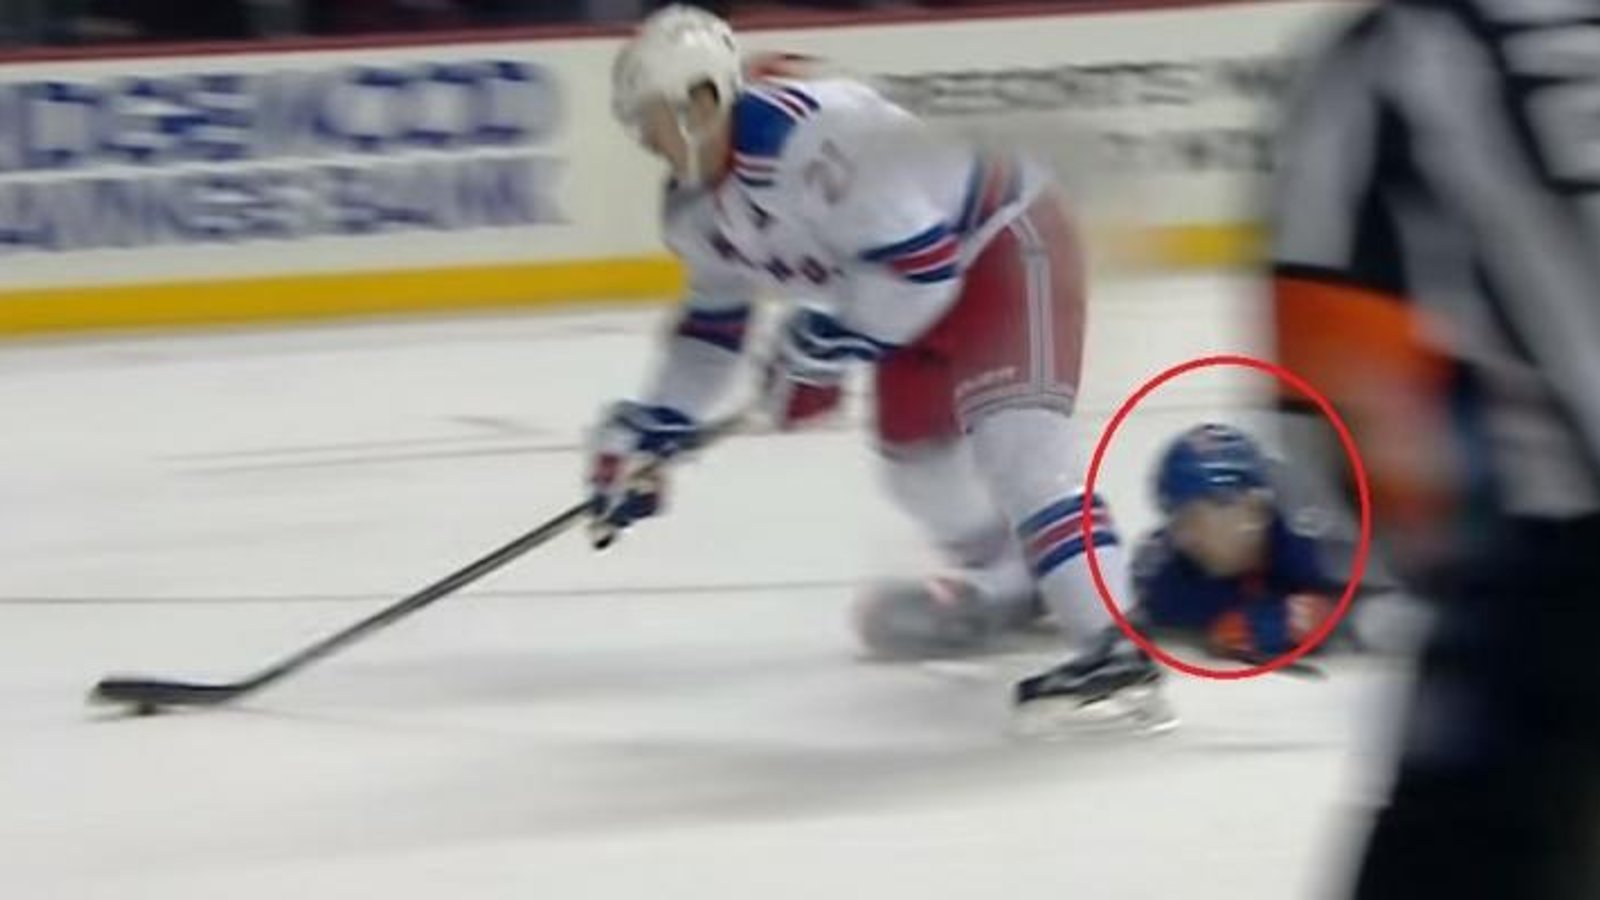 Horrifying moment as player falls and gets kicked in the face with a skate.